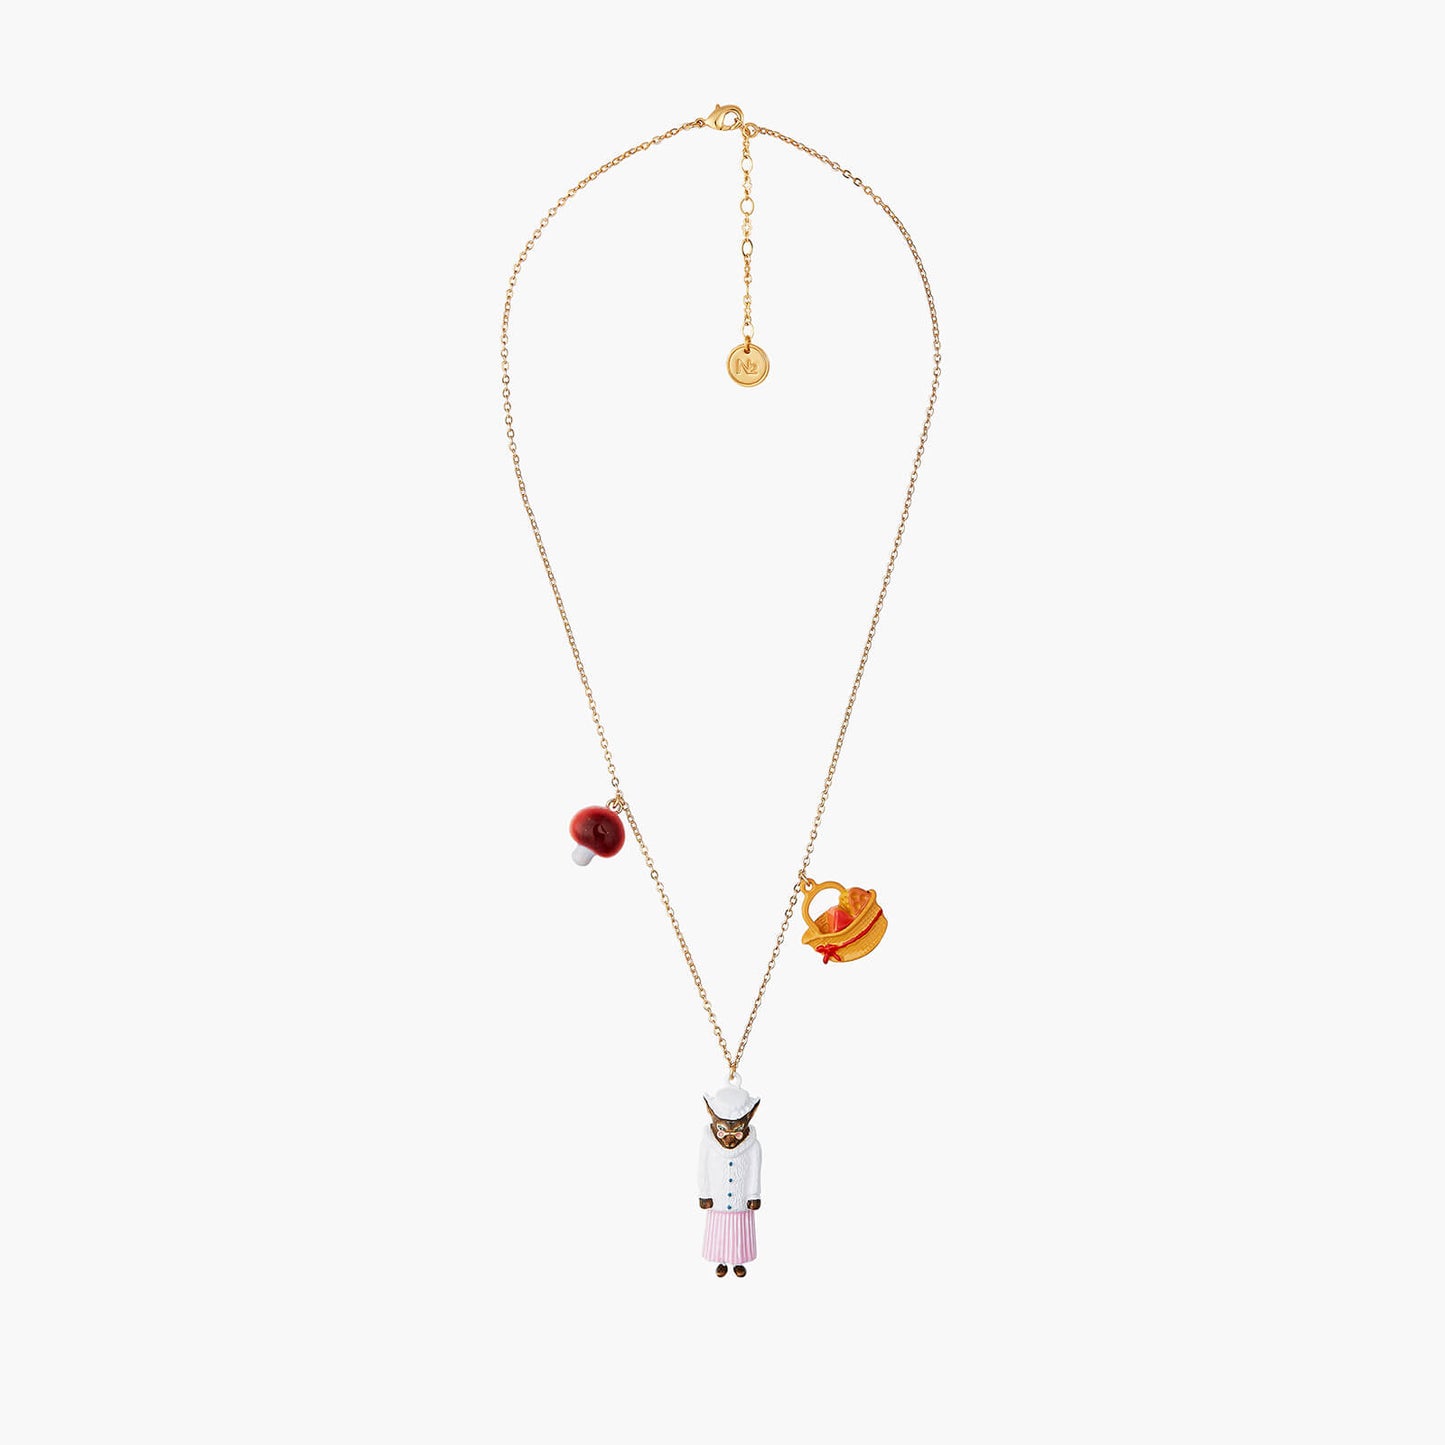 Big Bad Wolf Mushroom And Cheese Pieces Necklace | ANNA3021